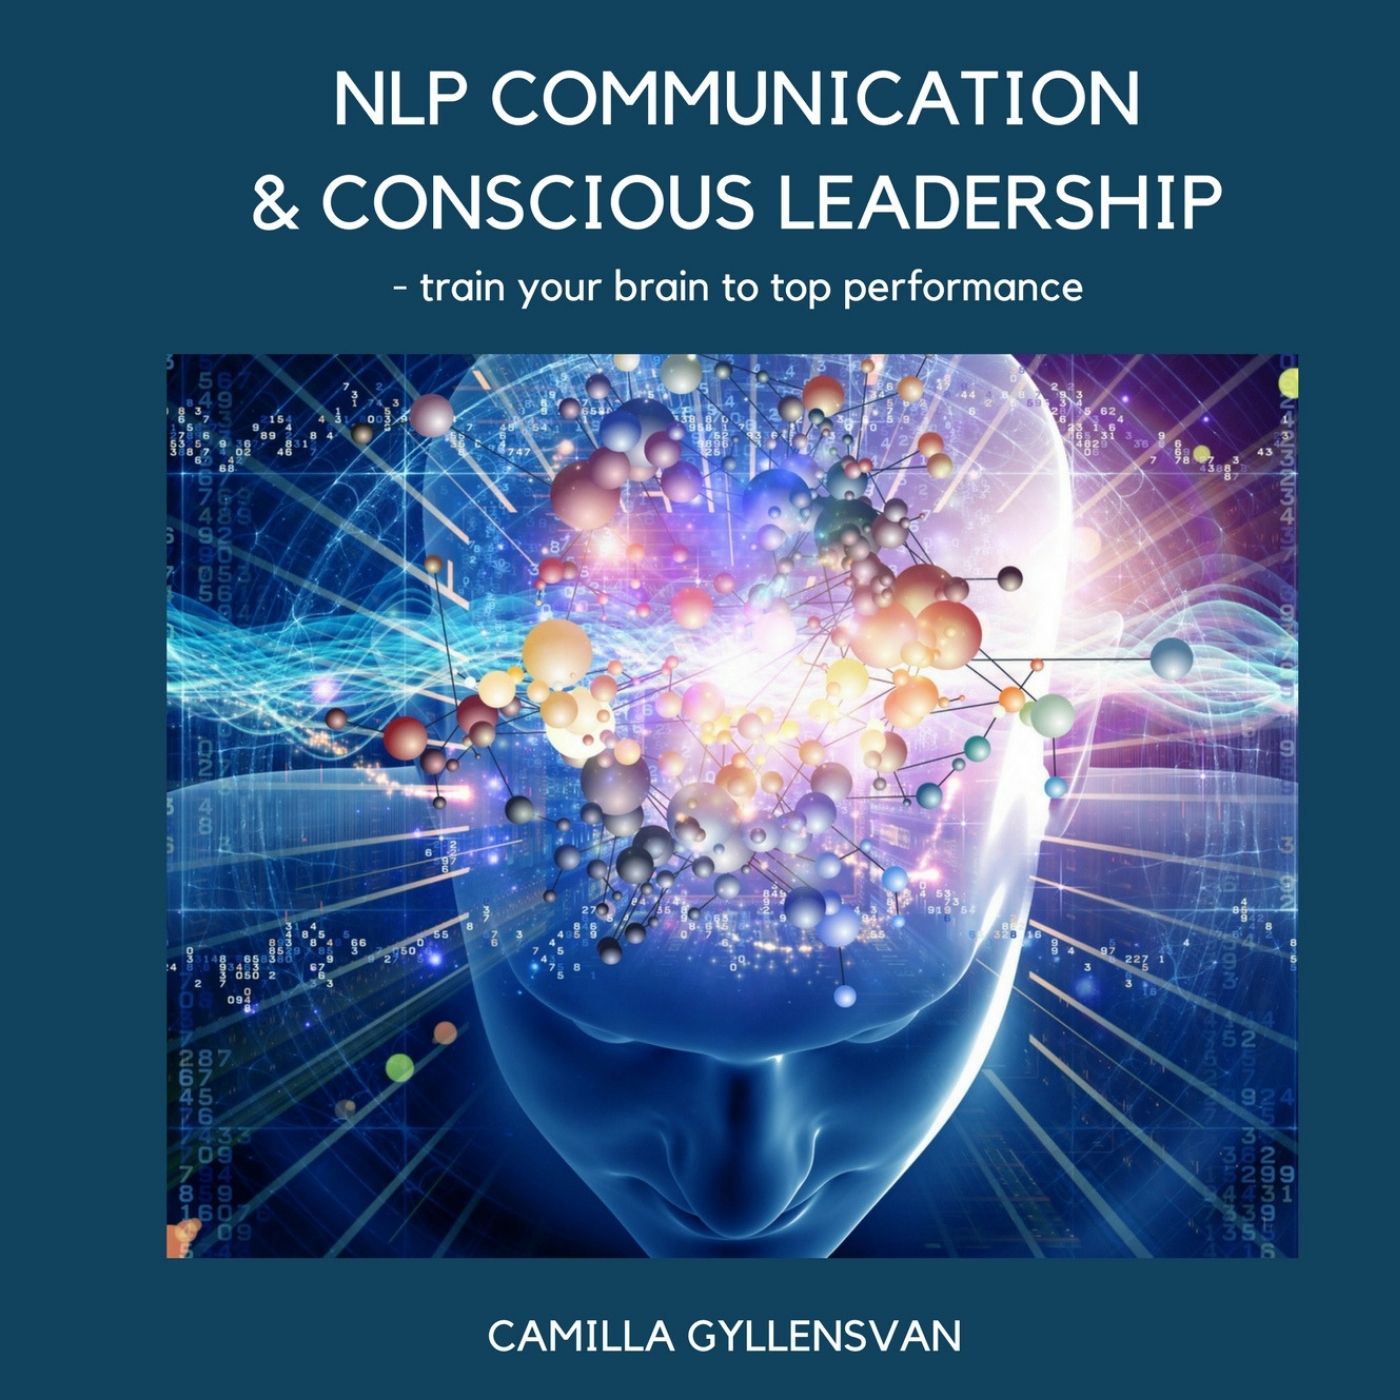 NLP Communication & conscious leadership, train your brain to top performance , audiobook by Camilla Gyllensvan